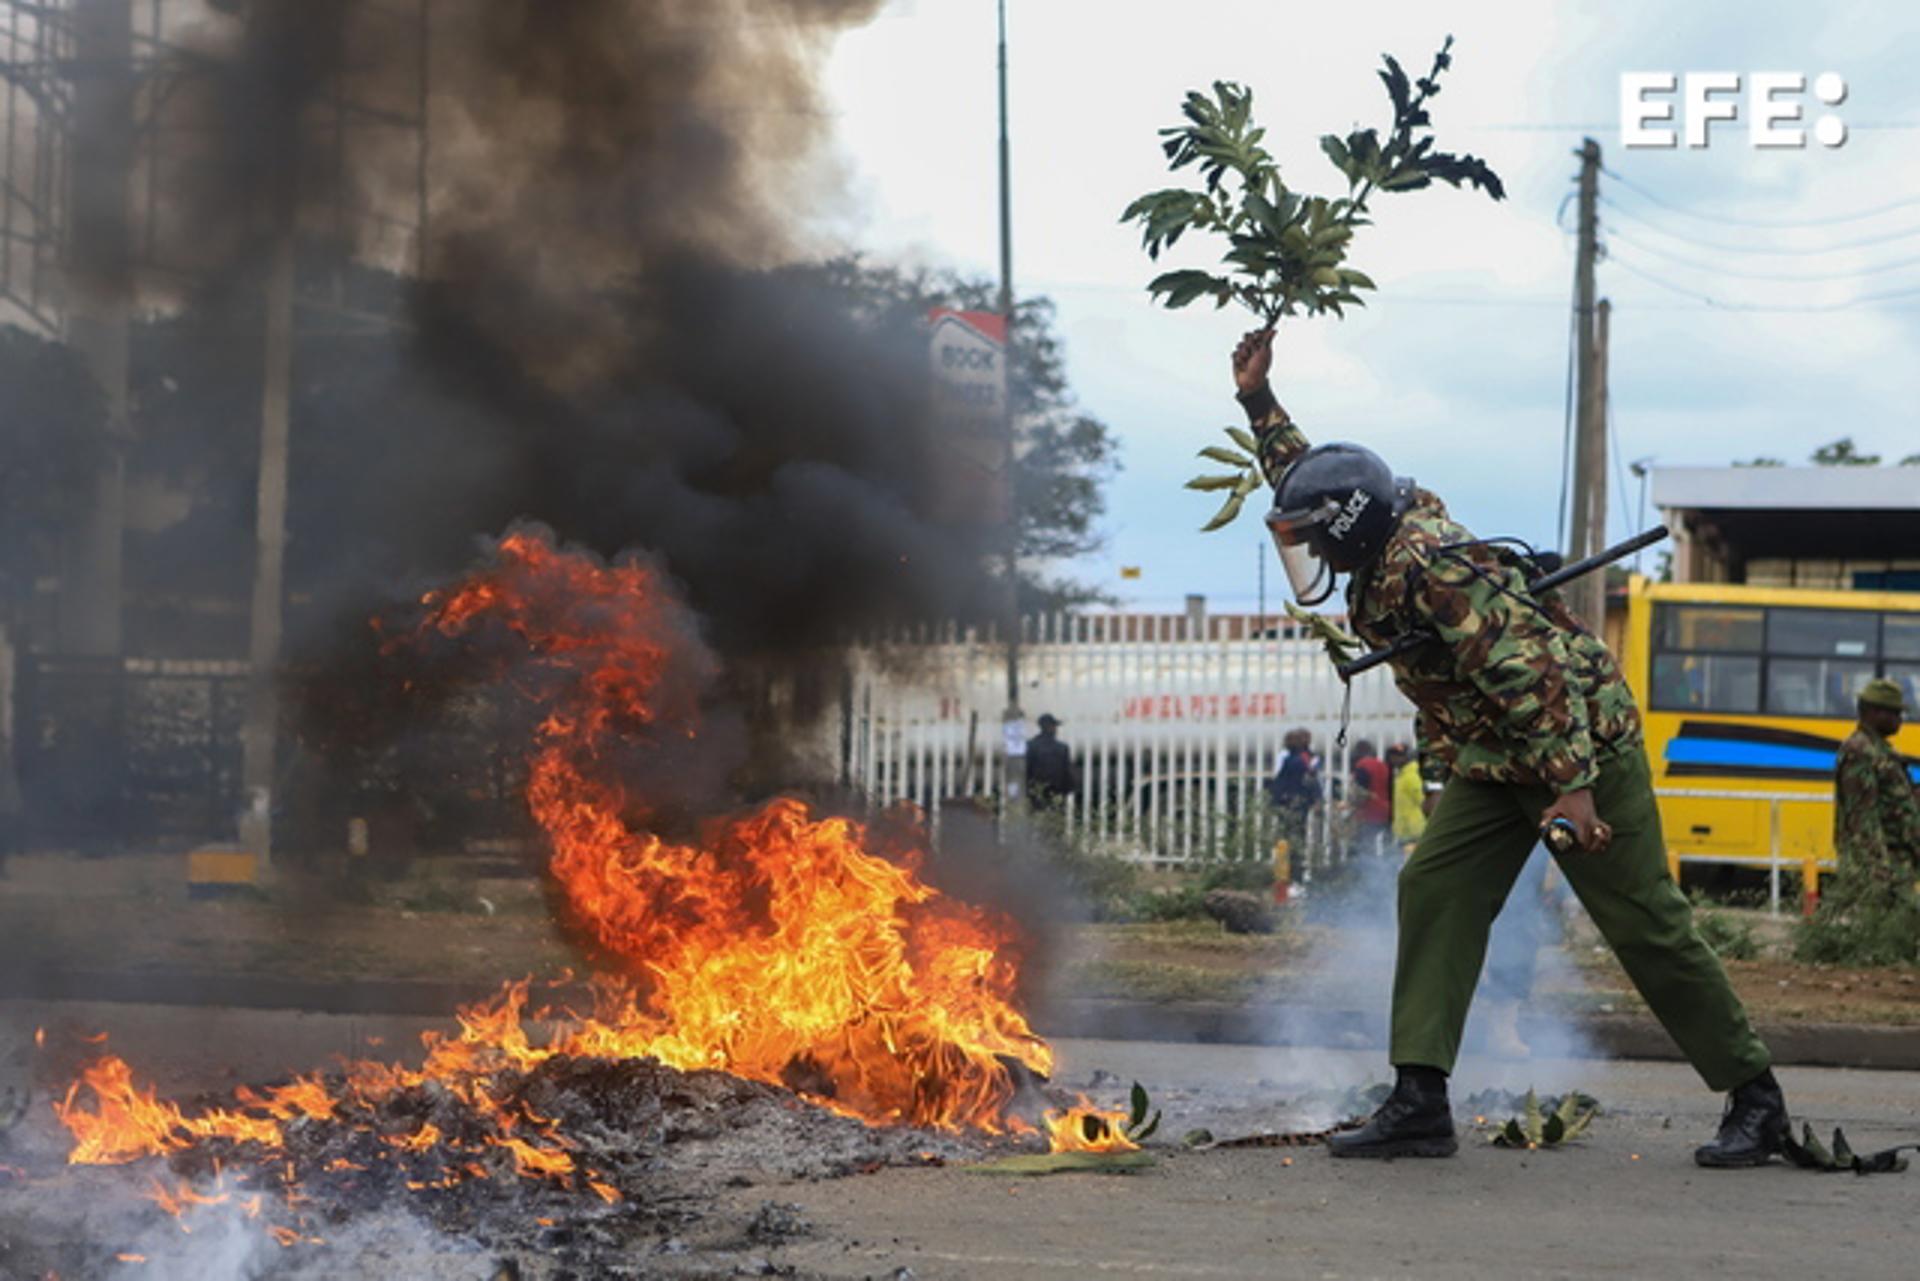 A Kenyan police officer tries to put out fire set by protesters during a rally against tax increases in Nairobi on 7 July 2023. EFE/EPA/STRINGER
